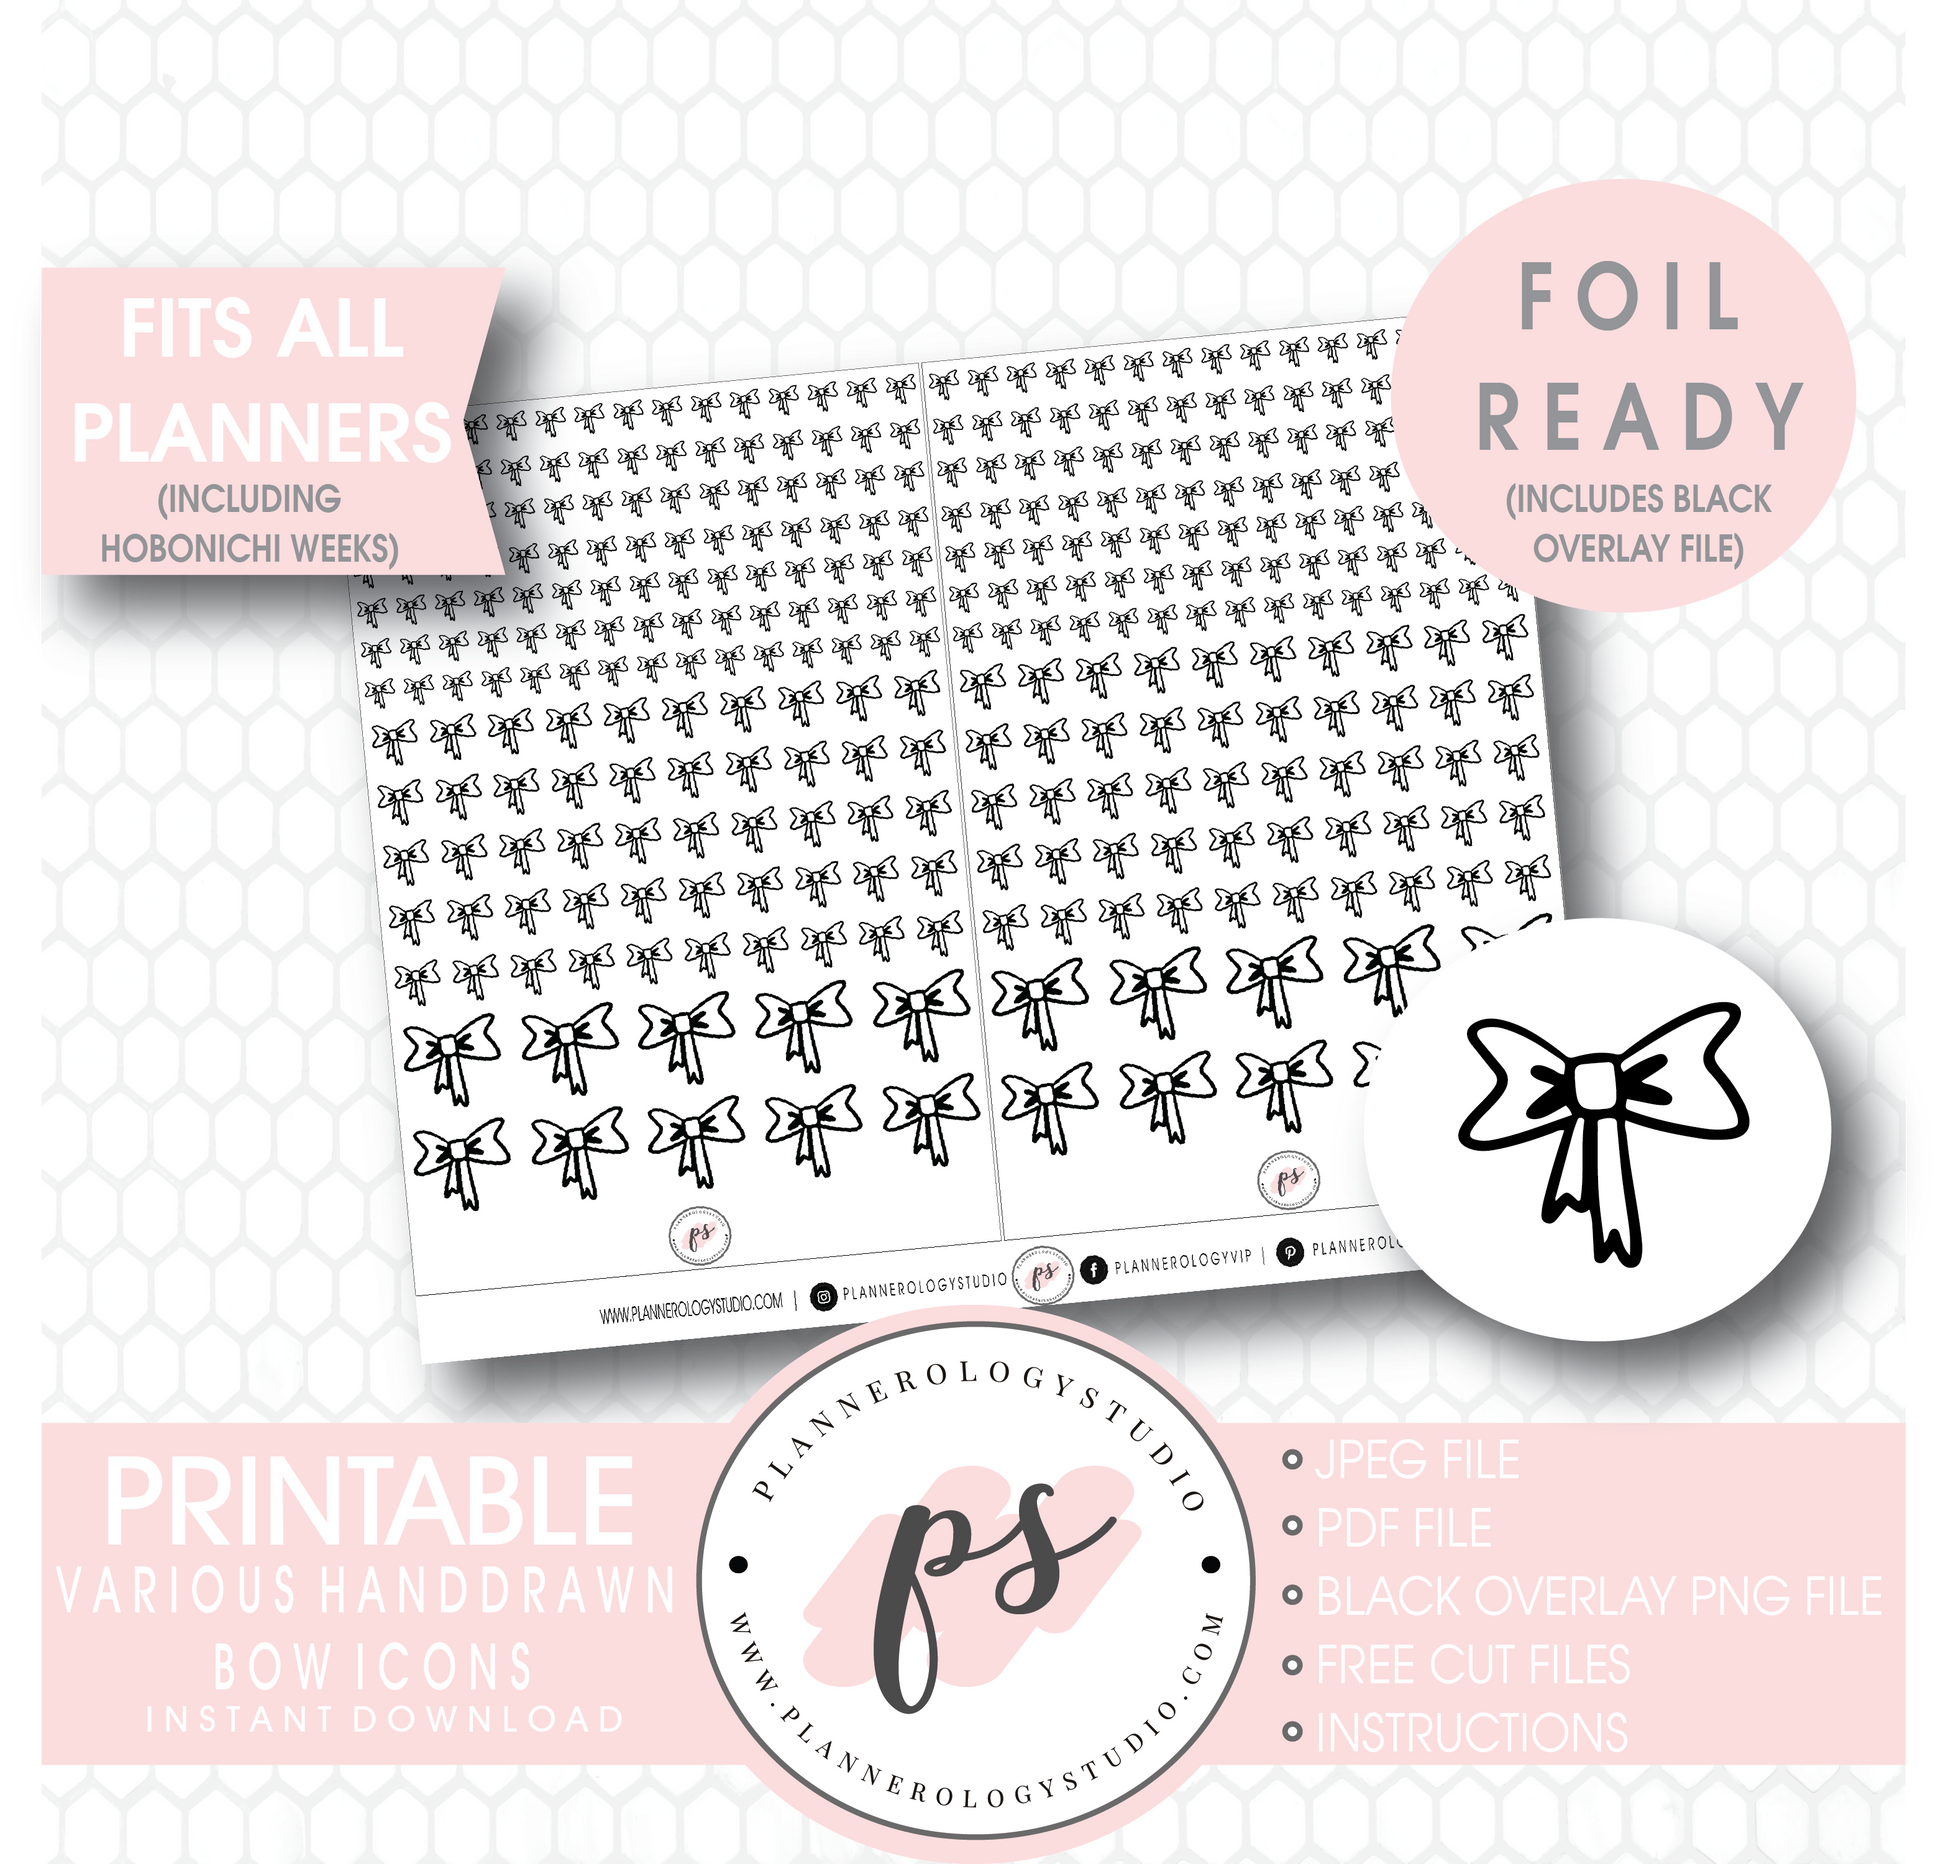 Various Handdrawn Bow Icon Digital Printable Planner Stickers (Foil Ready) - Plannerologystudio